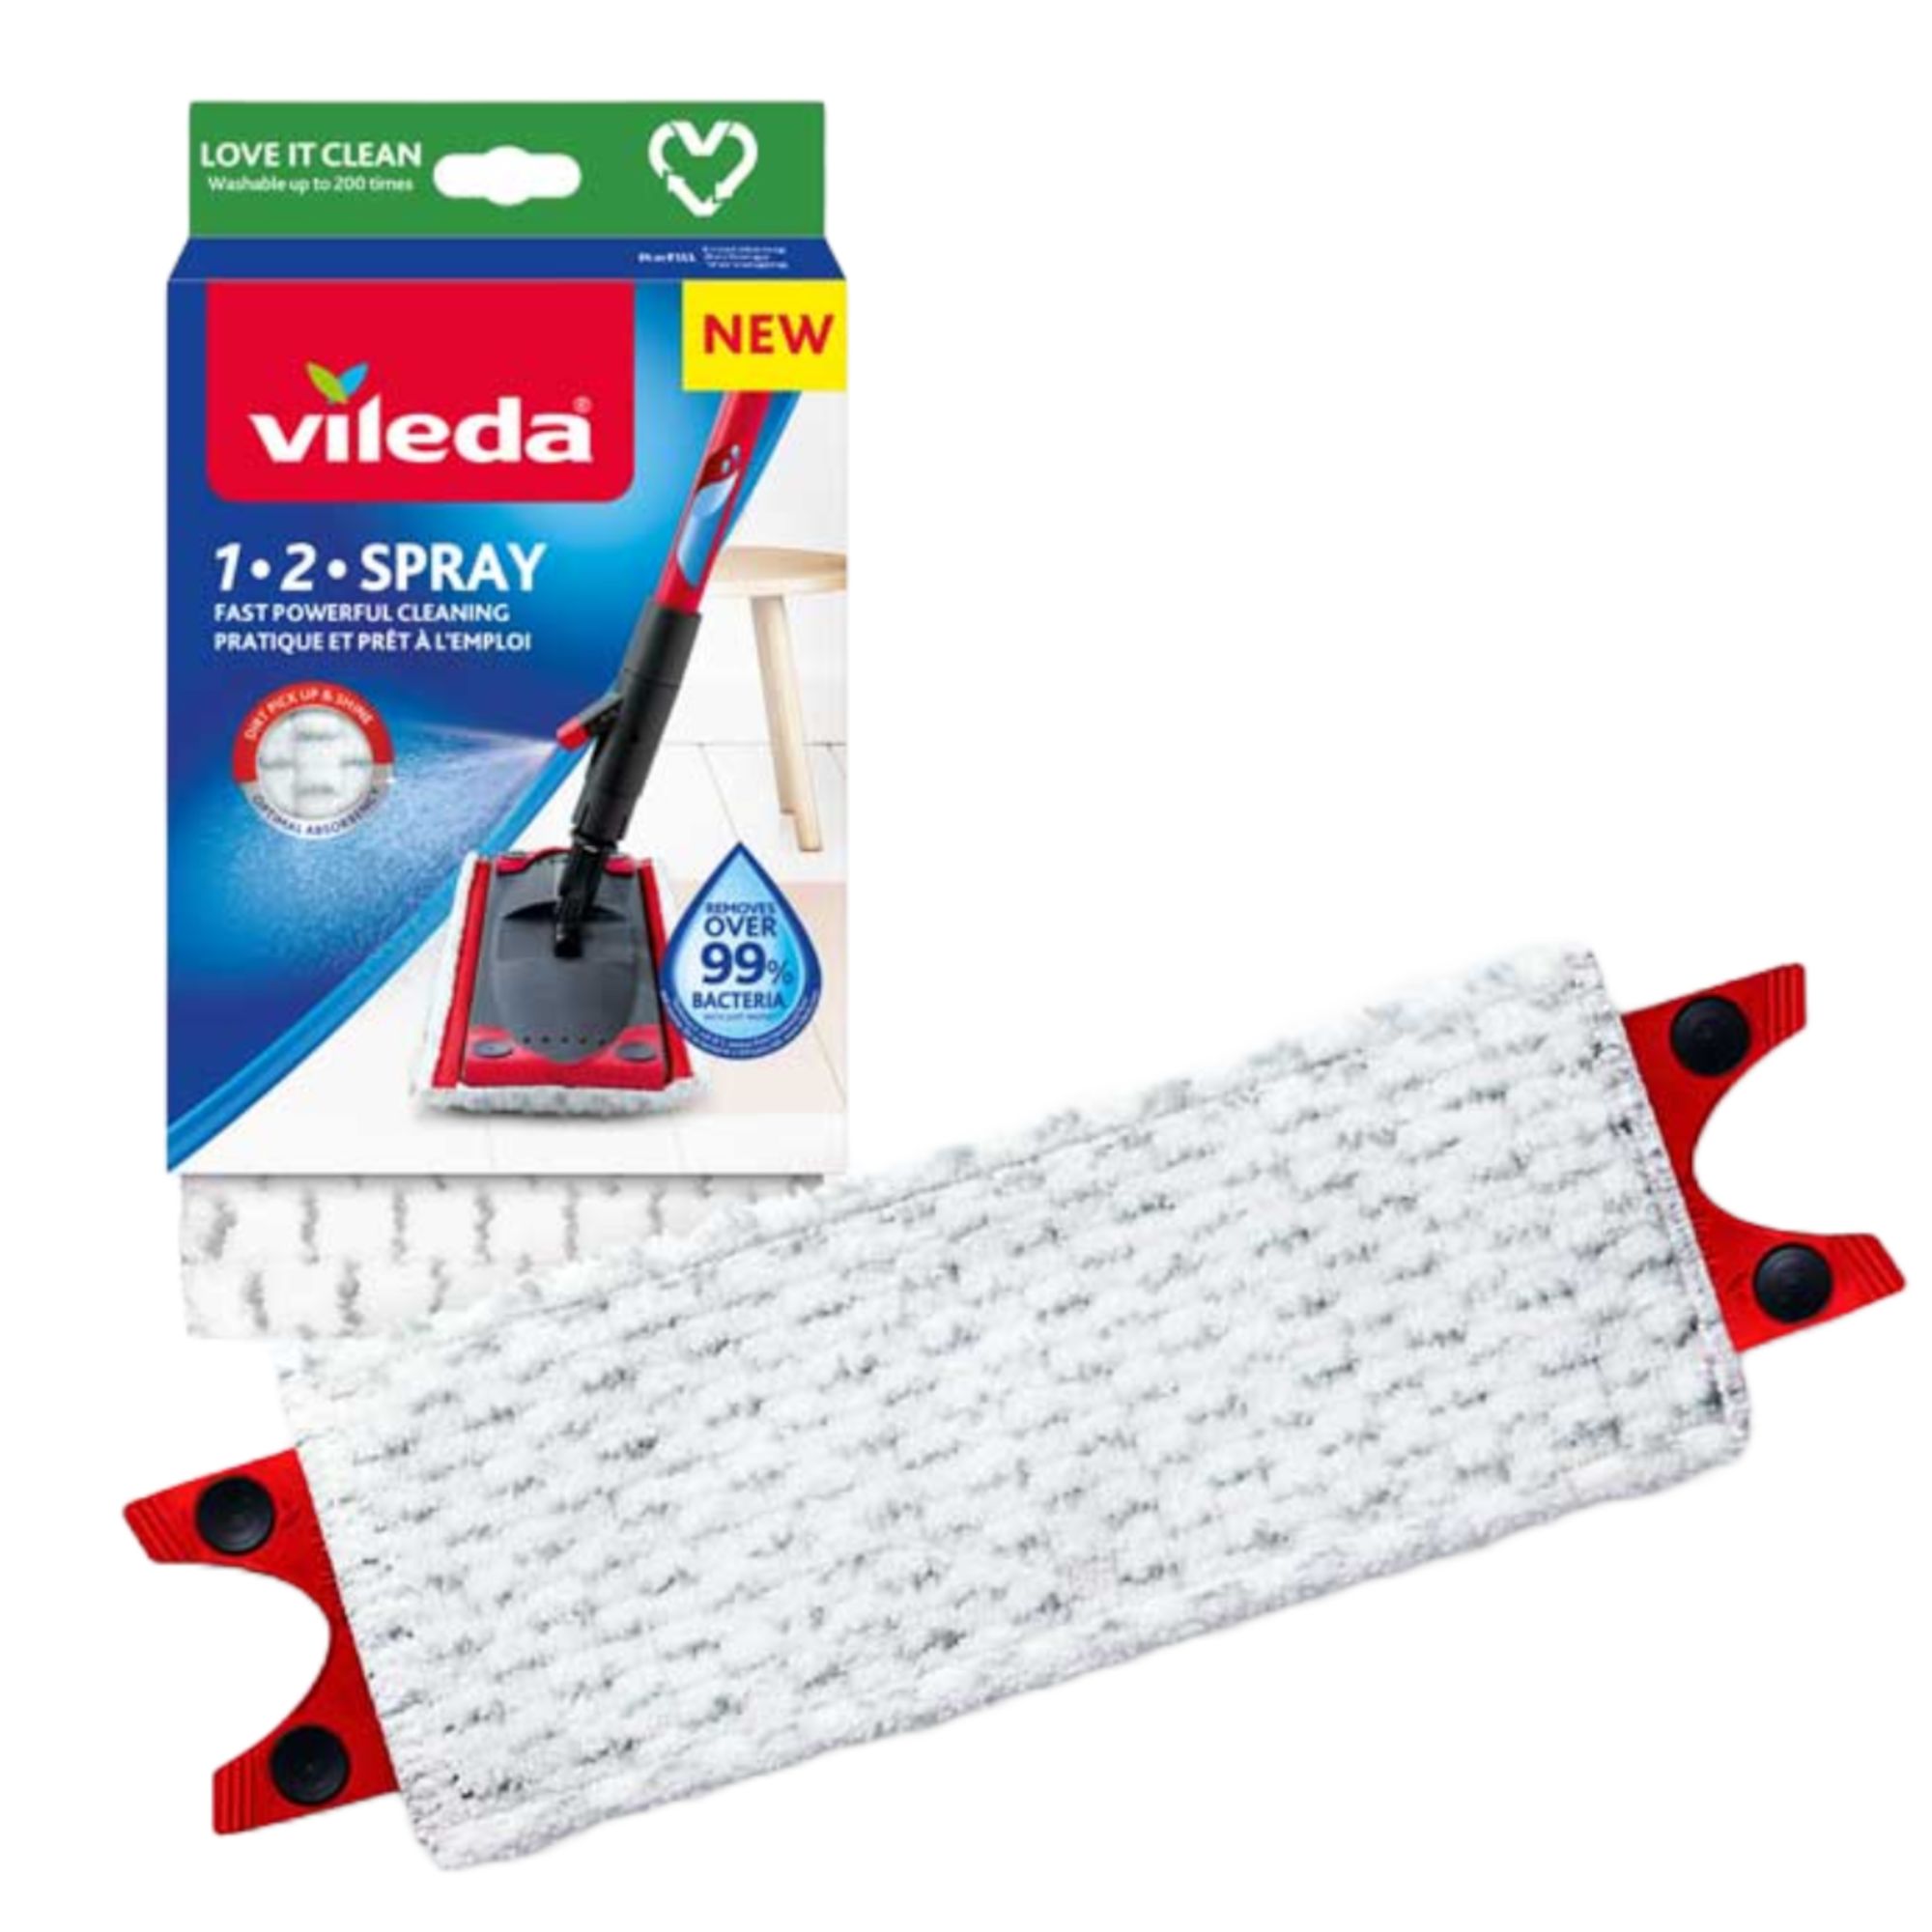 Vileda UK - 12 reasons to love the Vileda 1-2 Spray Mop: 1. It's quick and  easy - just spray and go! 2. The mop head harnesses the power of microfibre  (and